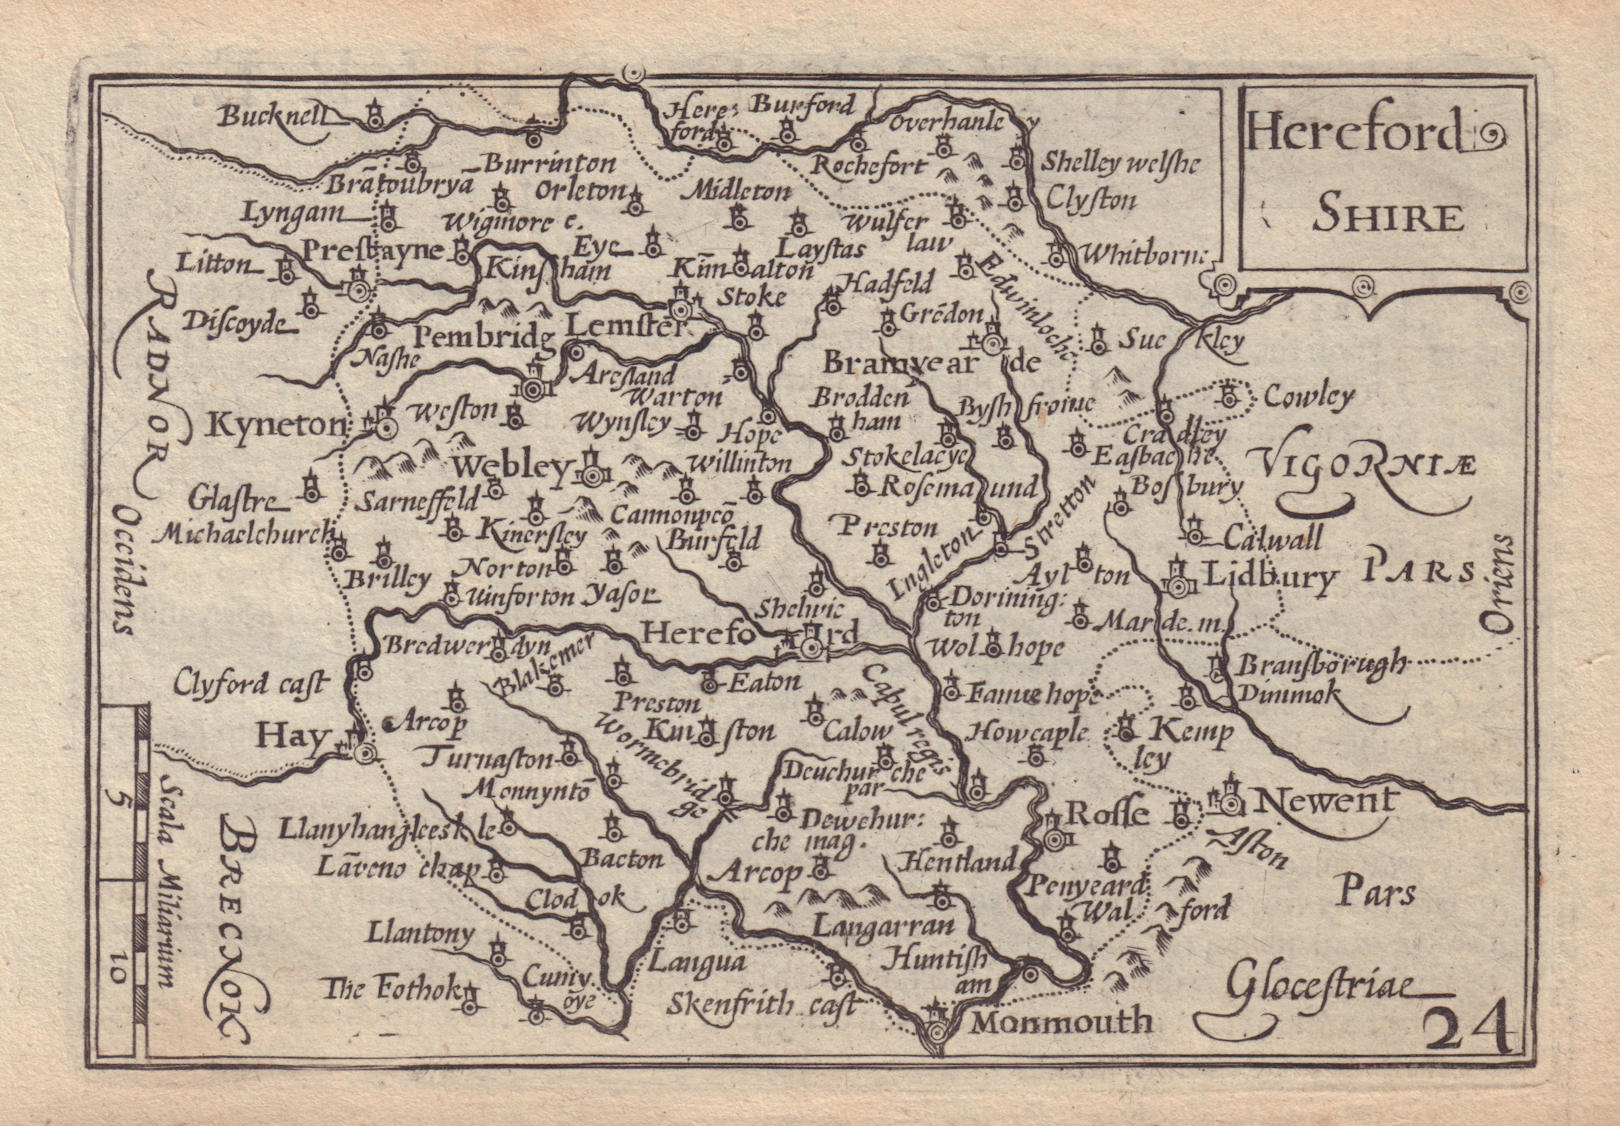 Associate Product Hereford Shire by van den Keere. "Speed miniature" Herefordshire county map 1632